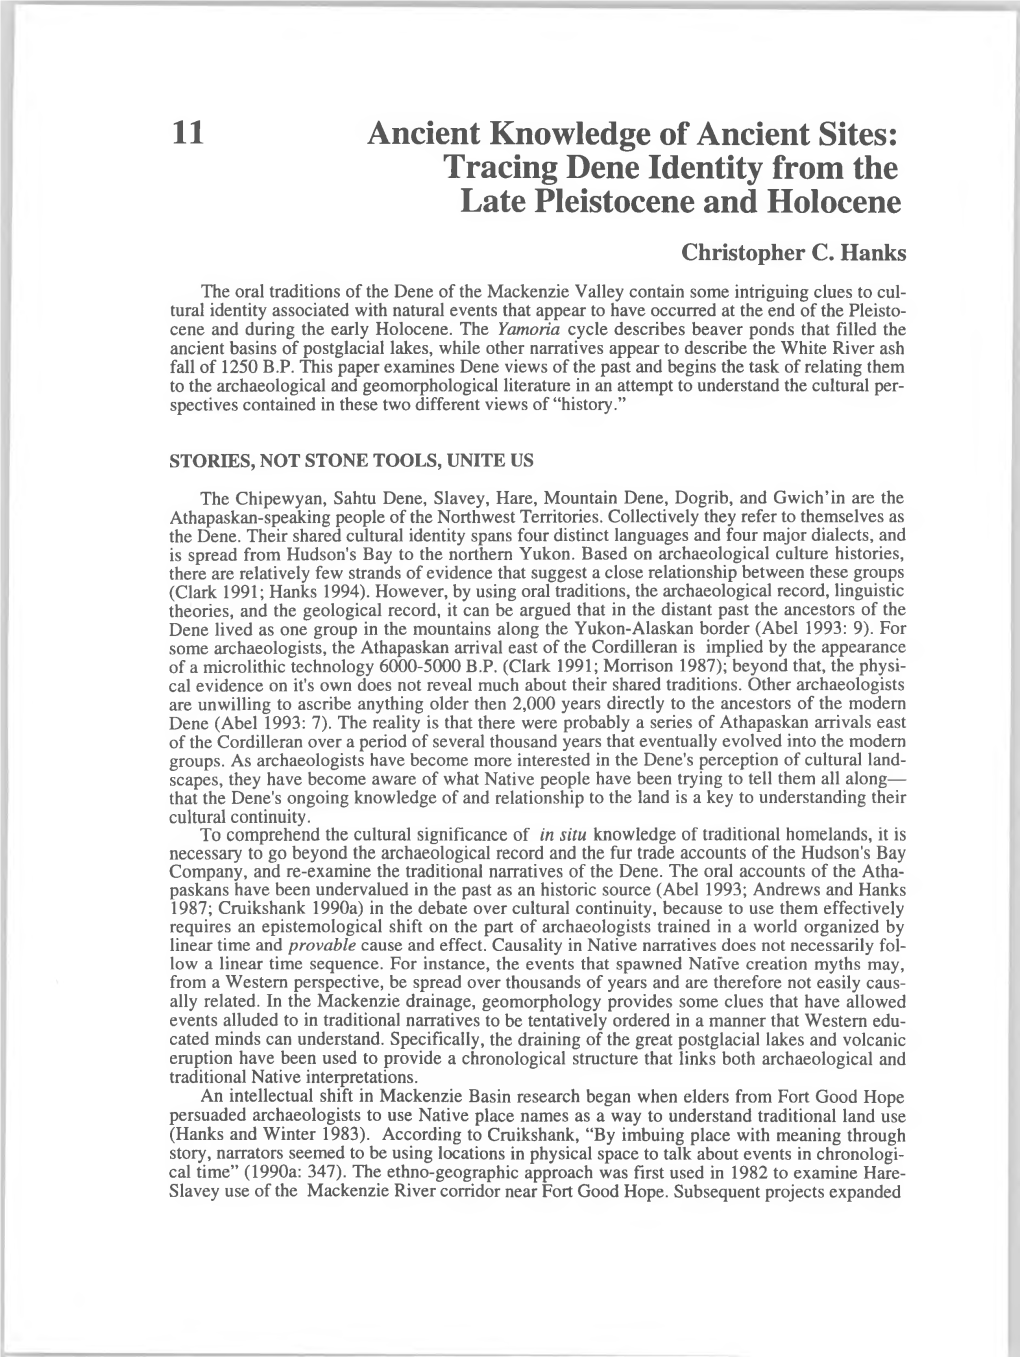 Ancient Knowledge of Ancient Sites: Tracing Dene Identity from the Late Pleistocene and Holocene Christopher C